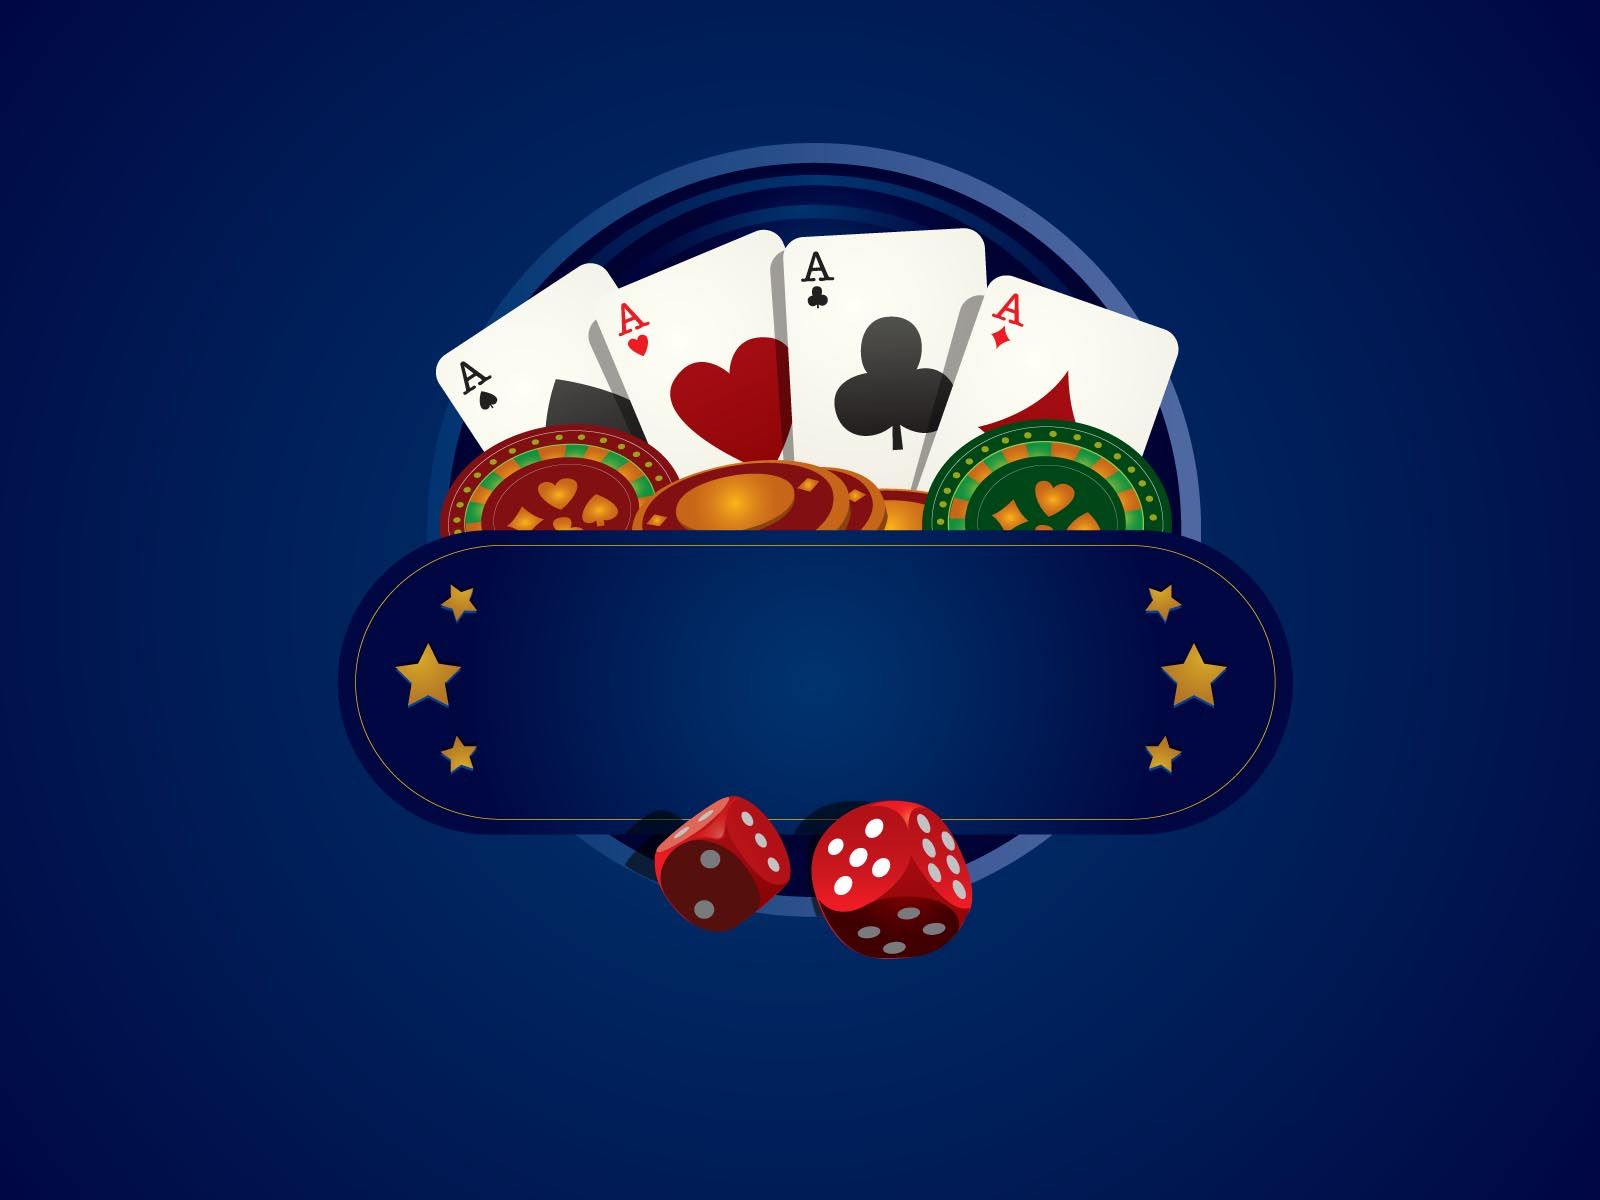 At the best casino games (Juegos de casino) sites, you will find a wide variety of games